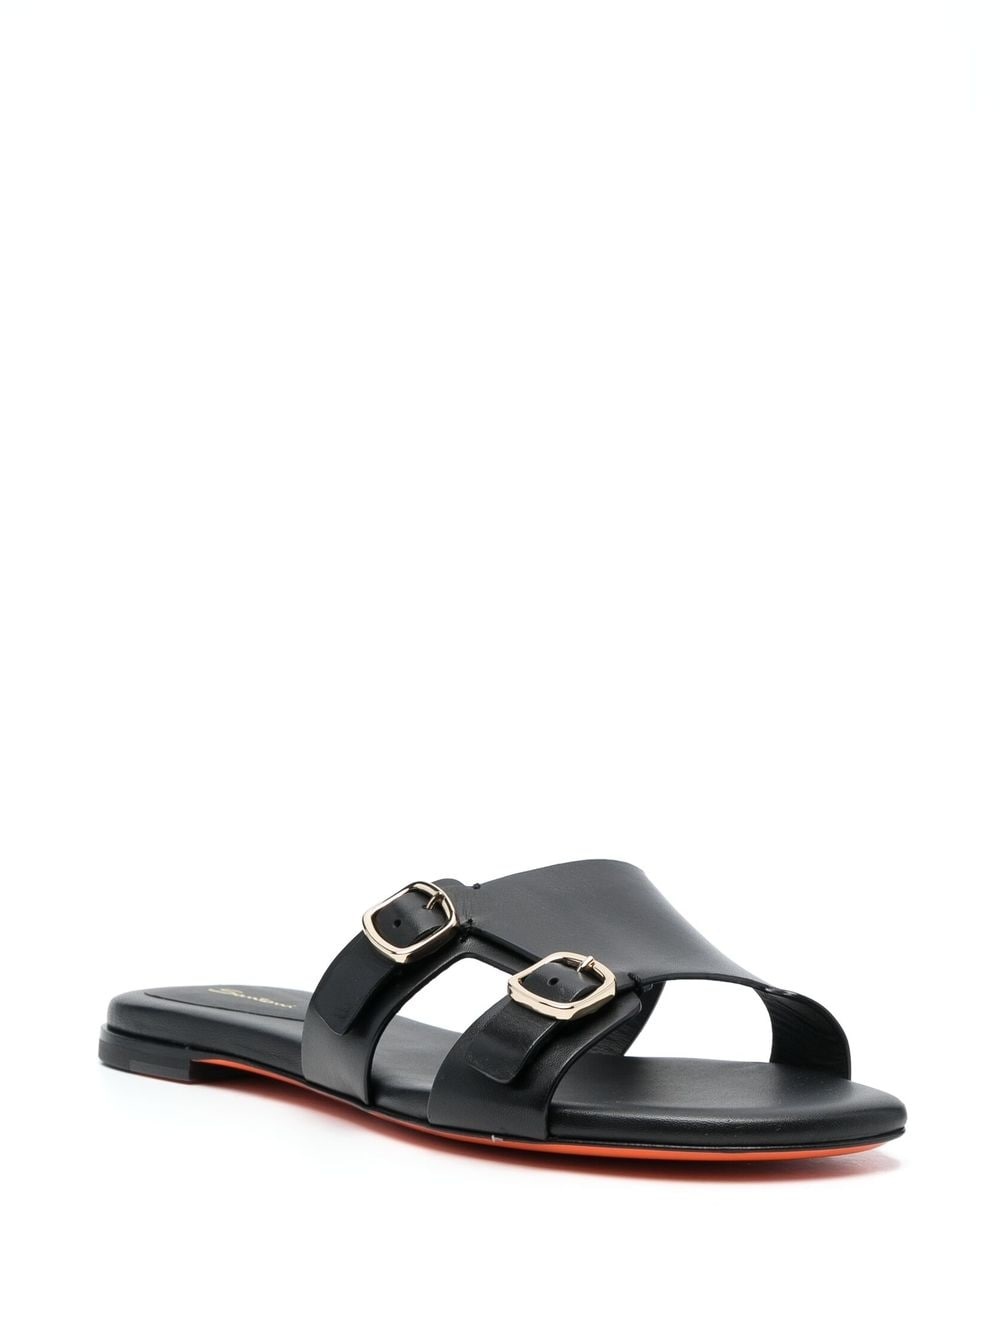 double-strap flat leather sandals - 2